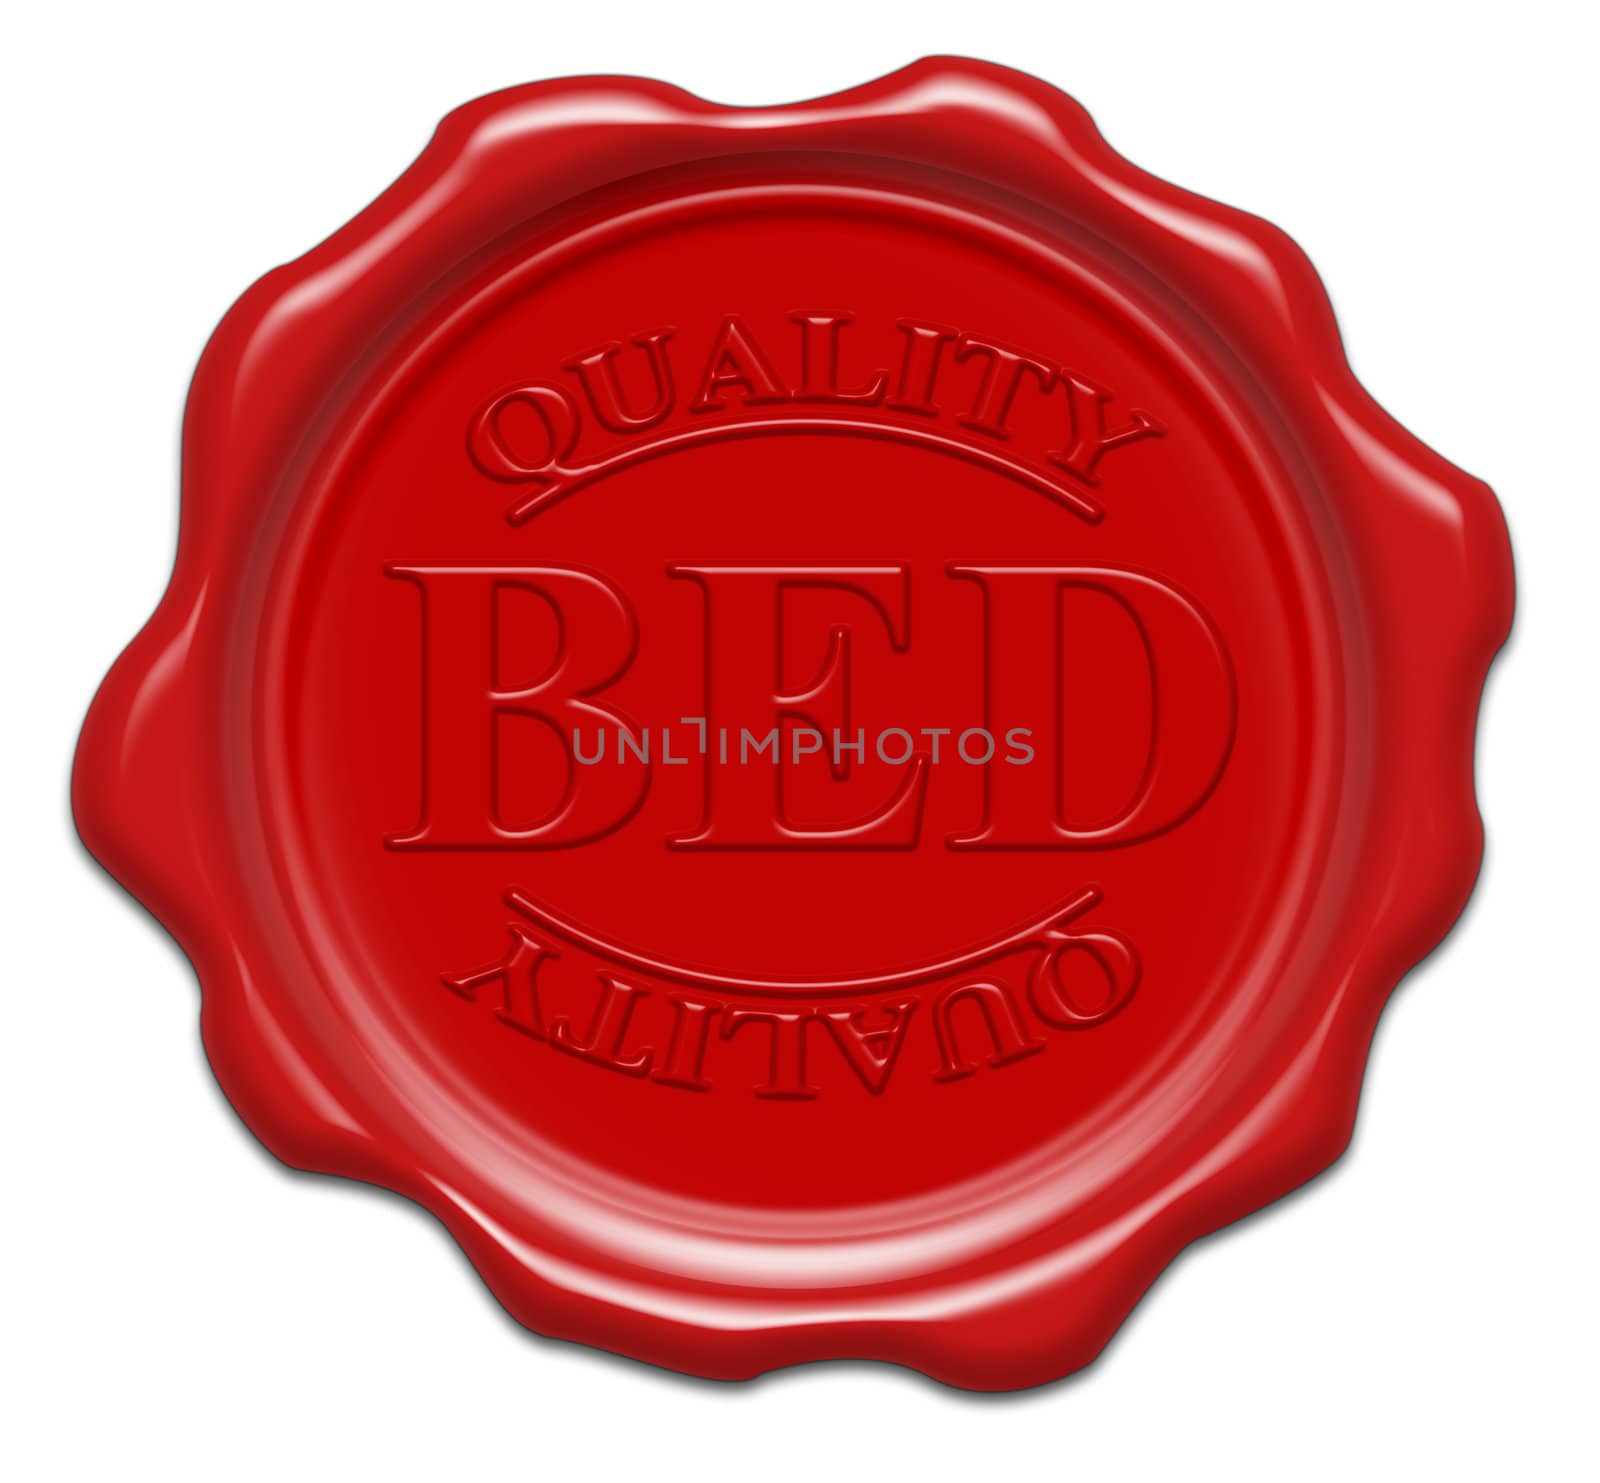 quality bed - illustration red wax seal isolated on white background with word : bed